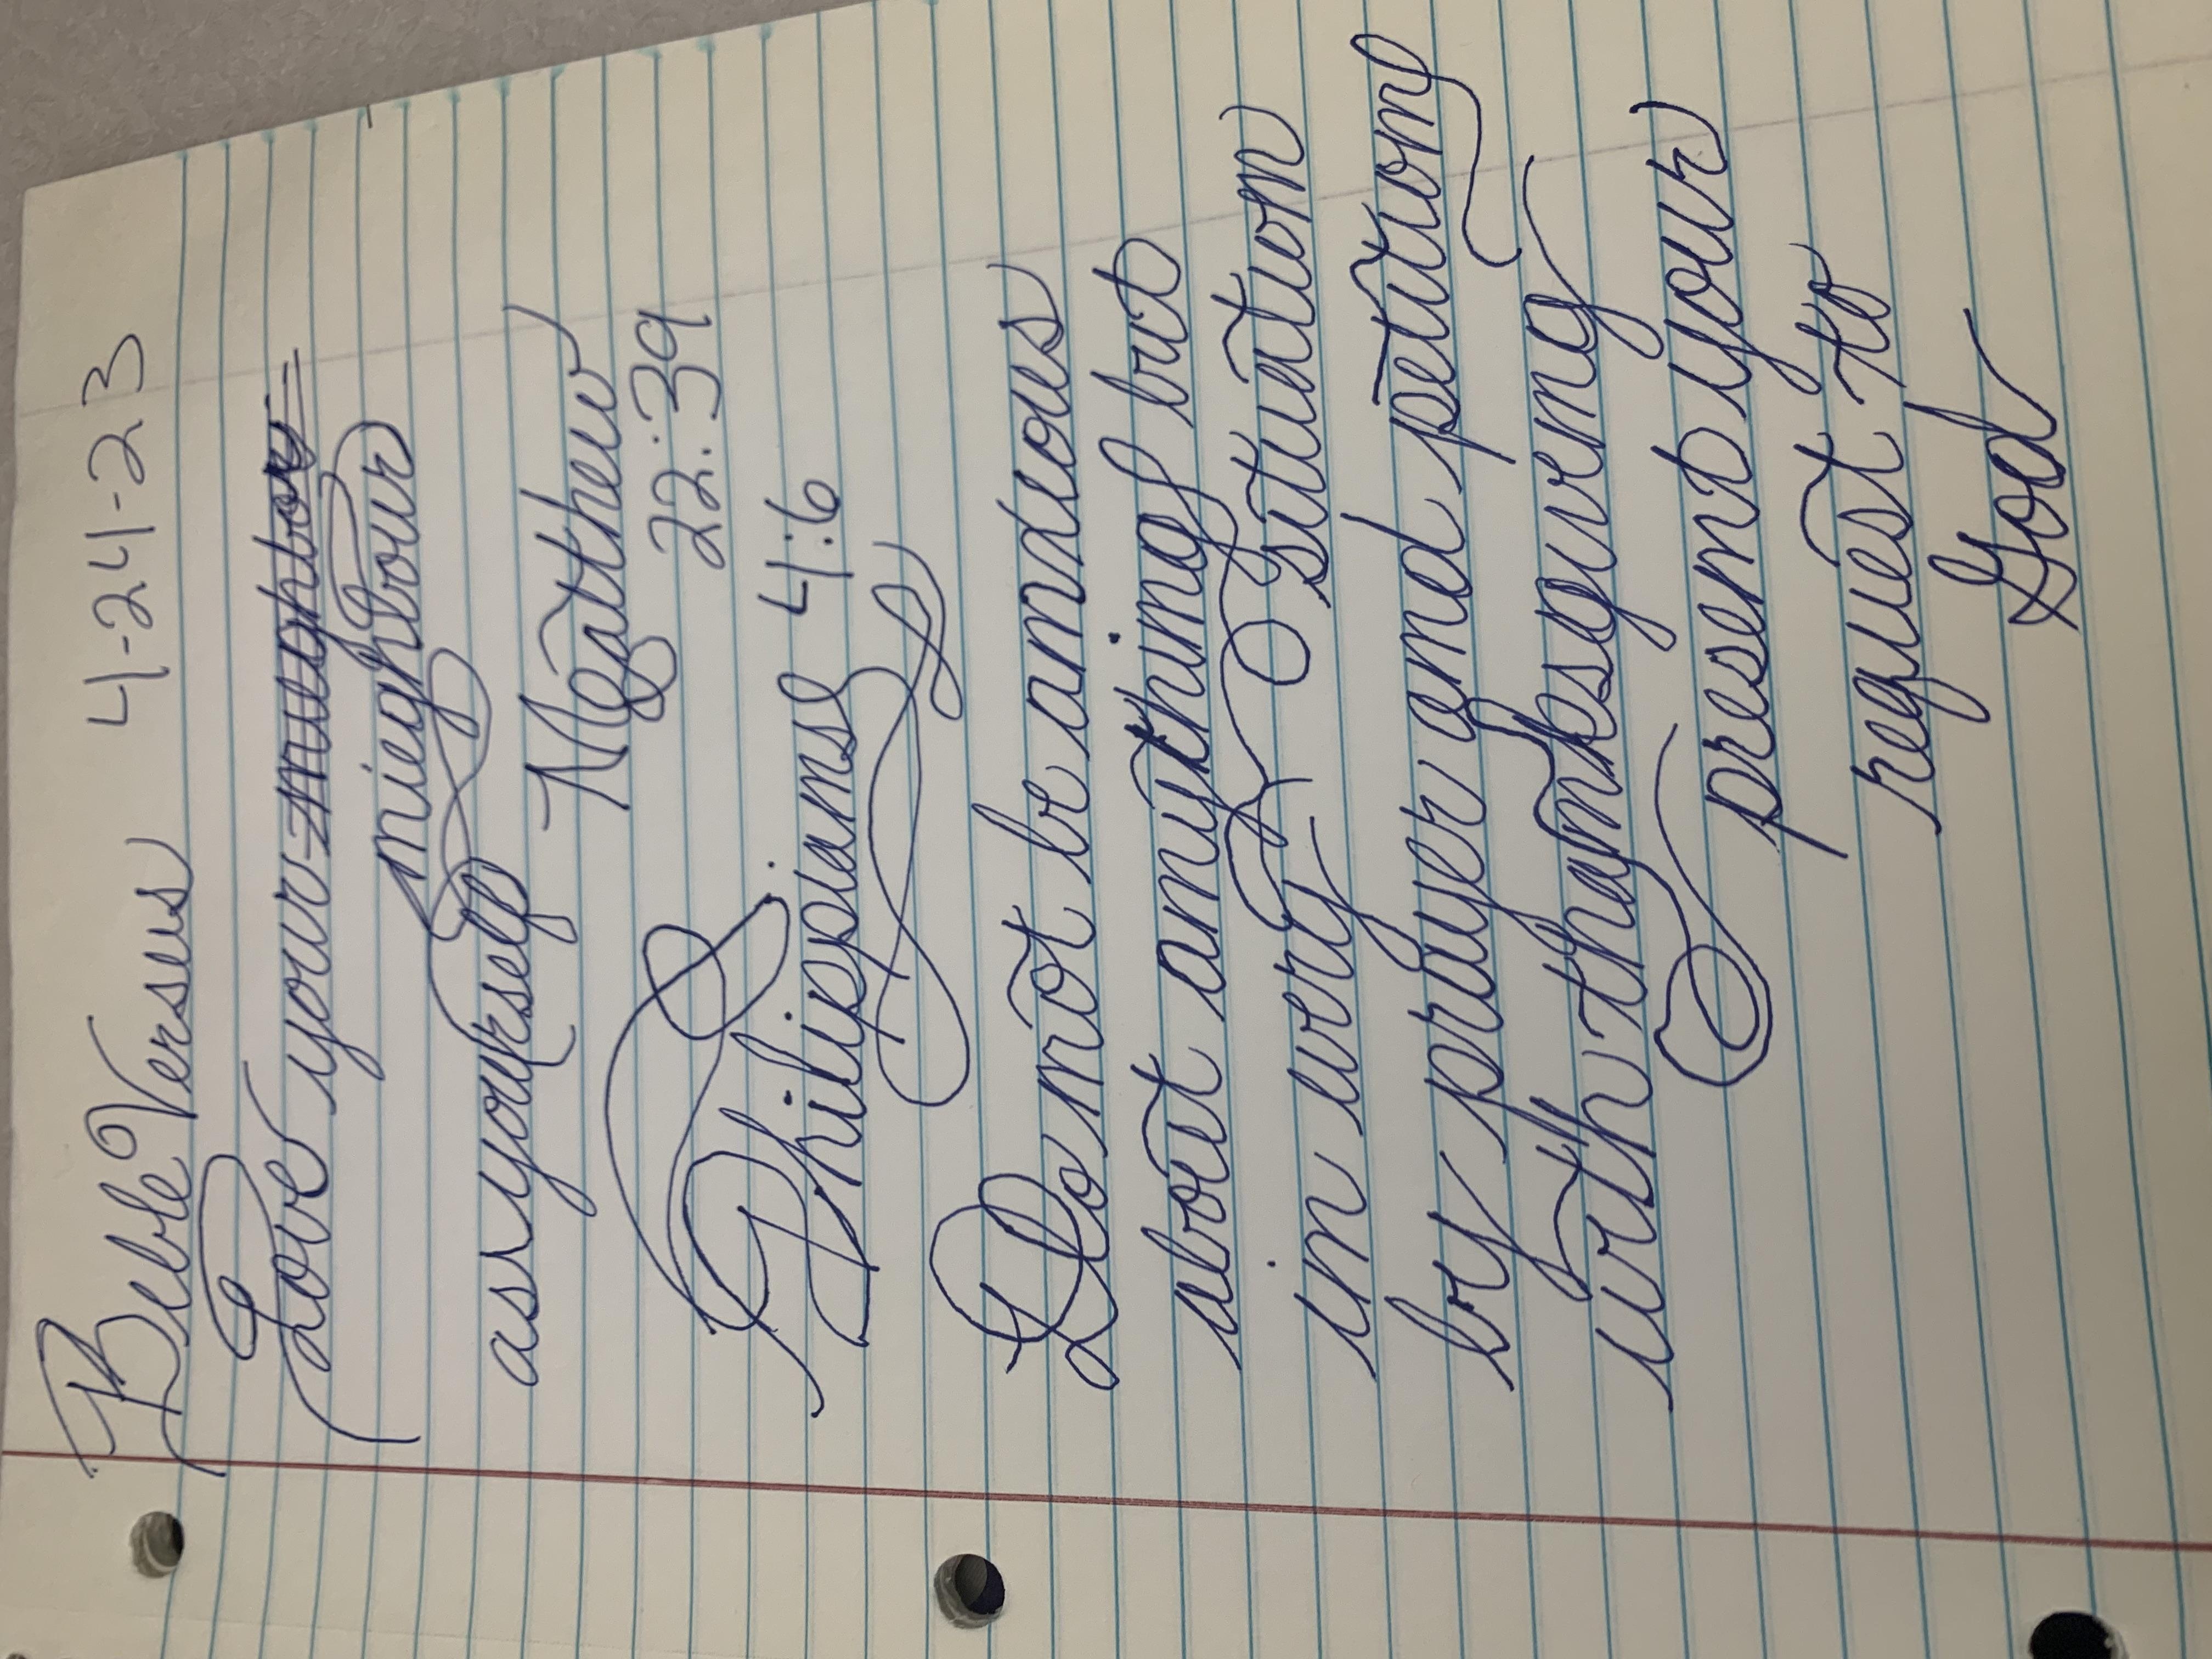 How To Write In Cursive For Beginners